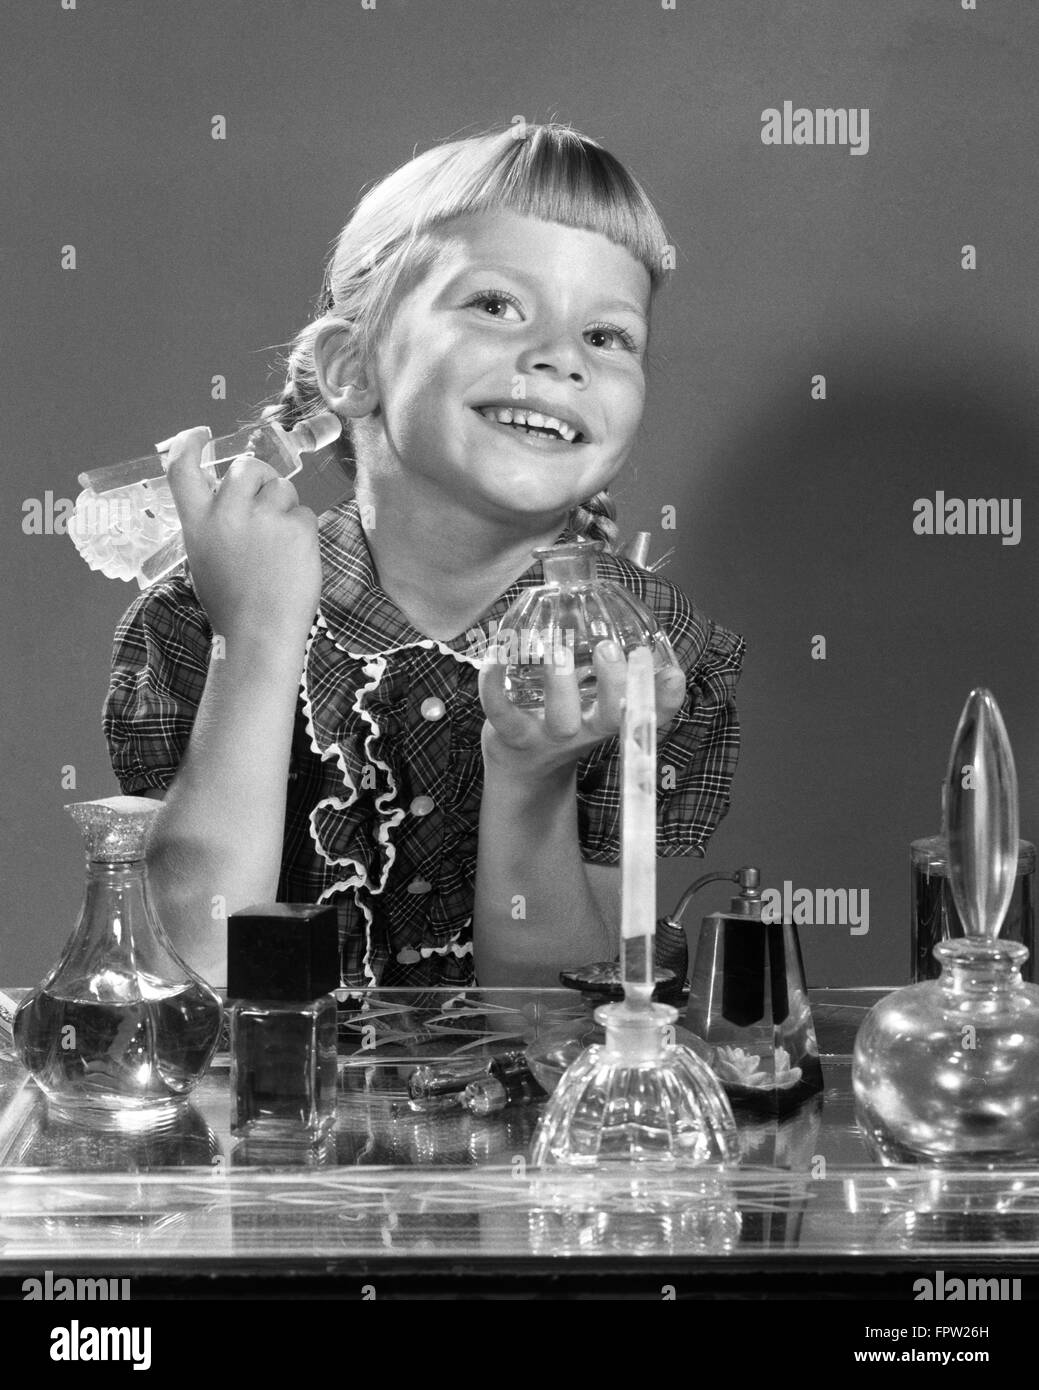 1960s SMILING LITTLE GIRL SITTING AT MOTHER’S BUREAU VANITY PERFUME BOTTLES IN FRONT LOOKING AT CAMERA IN MIRROR Stock Photo